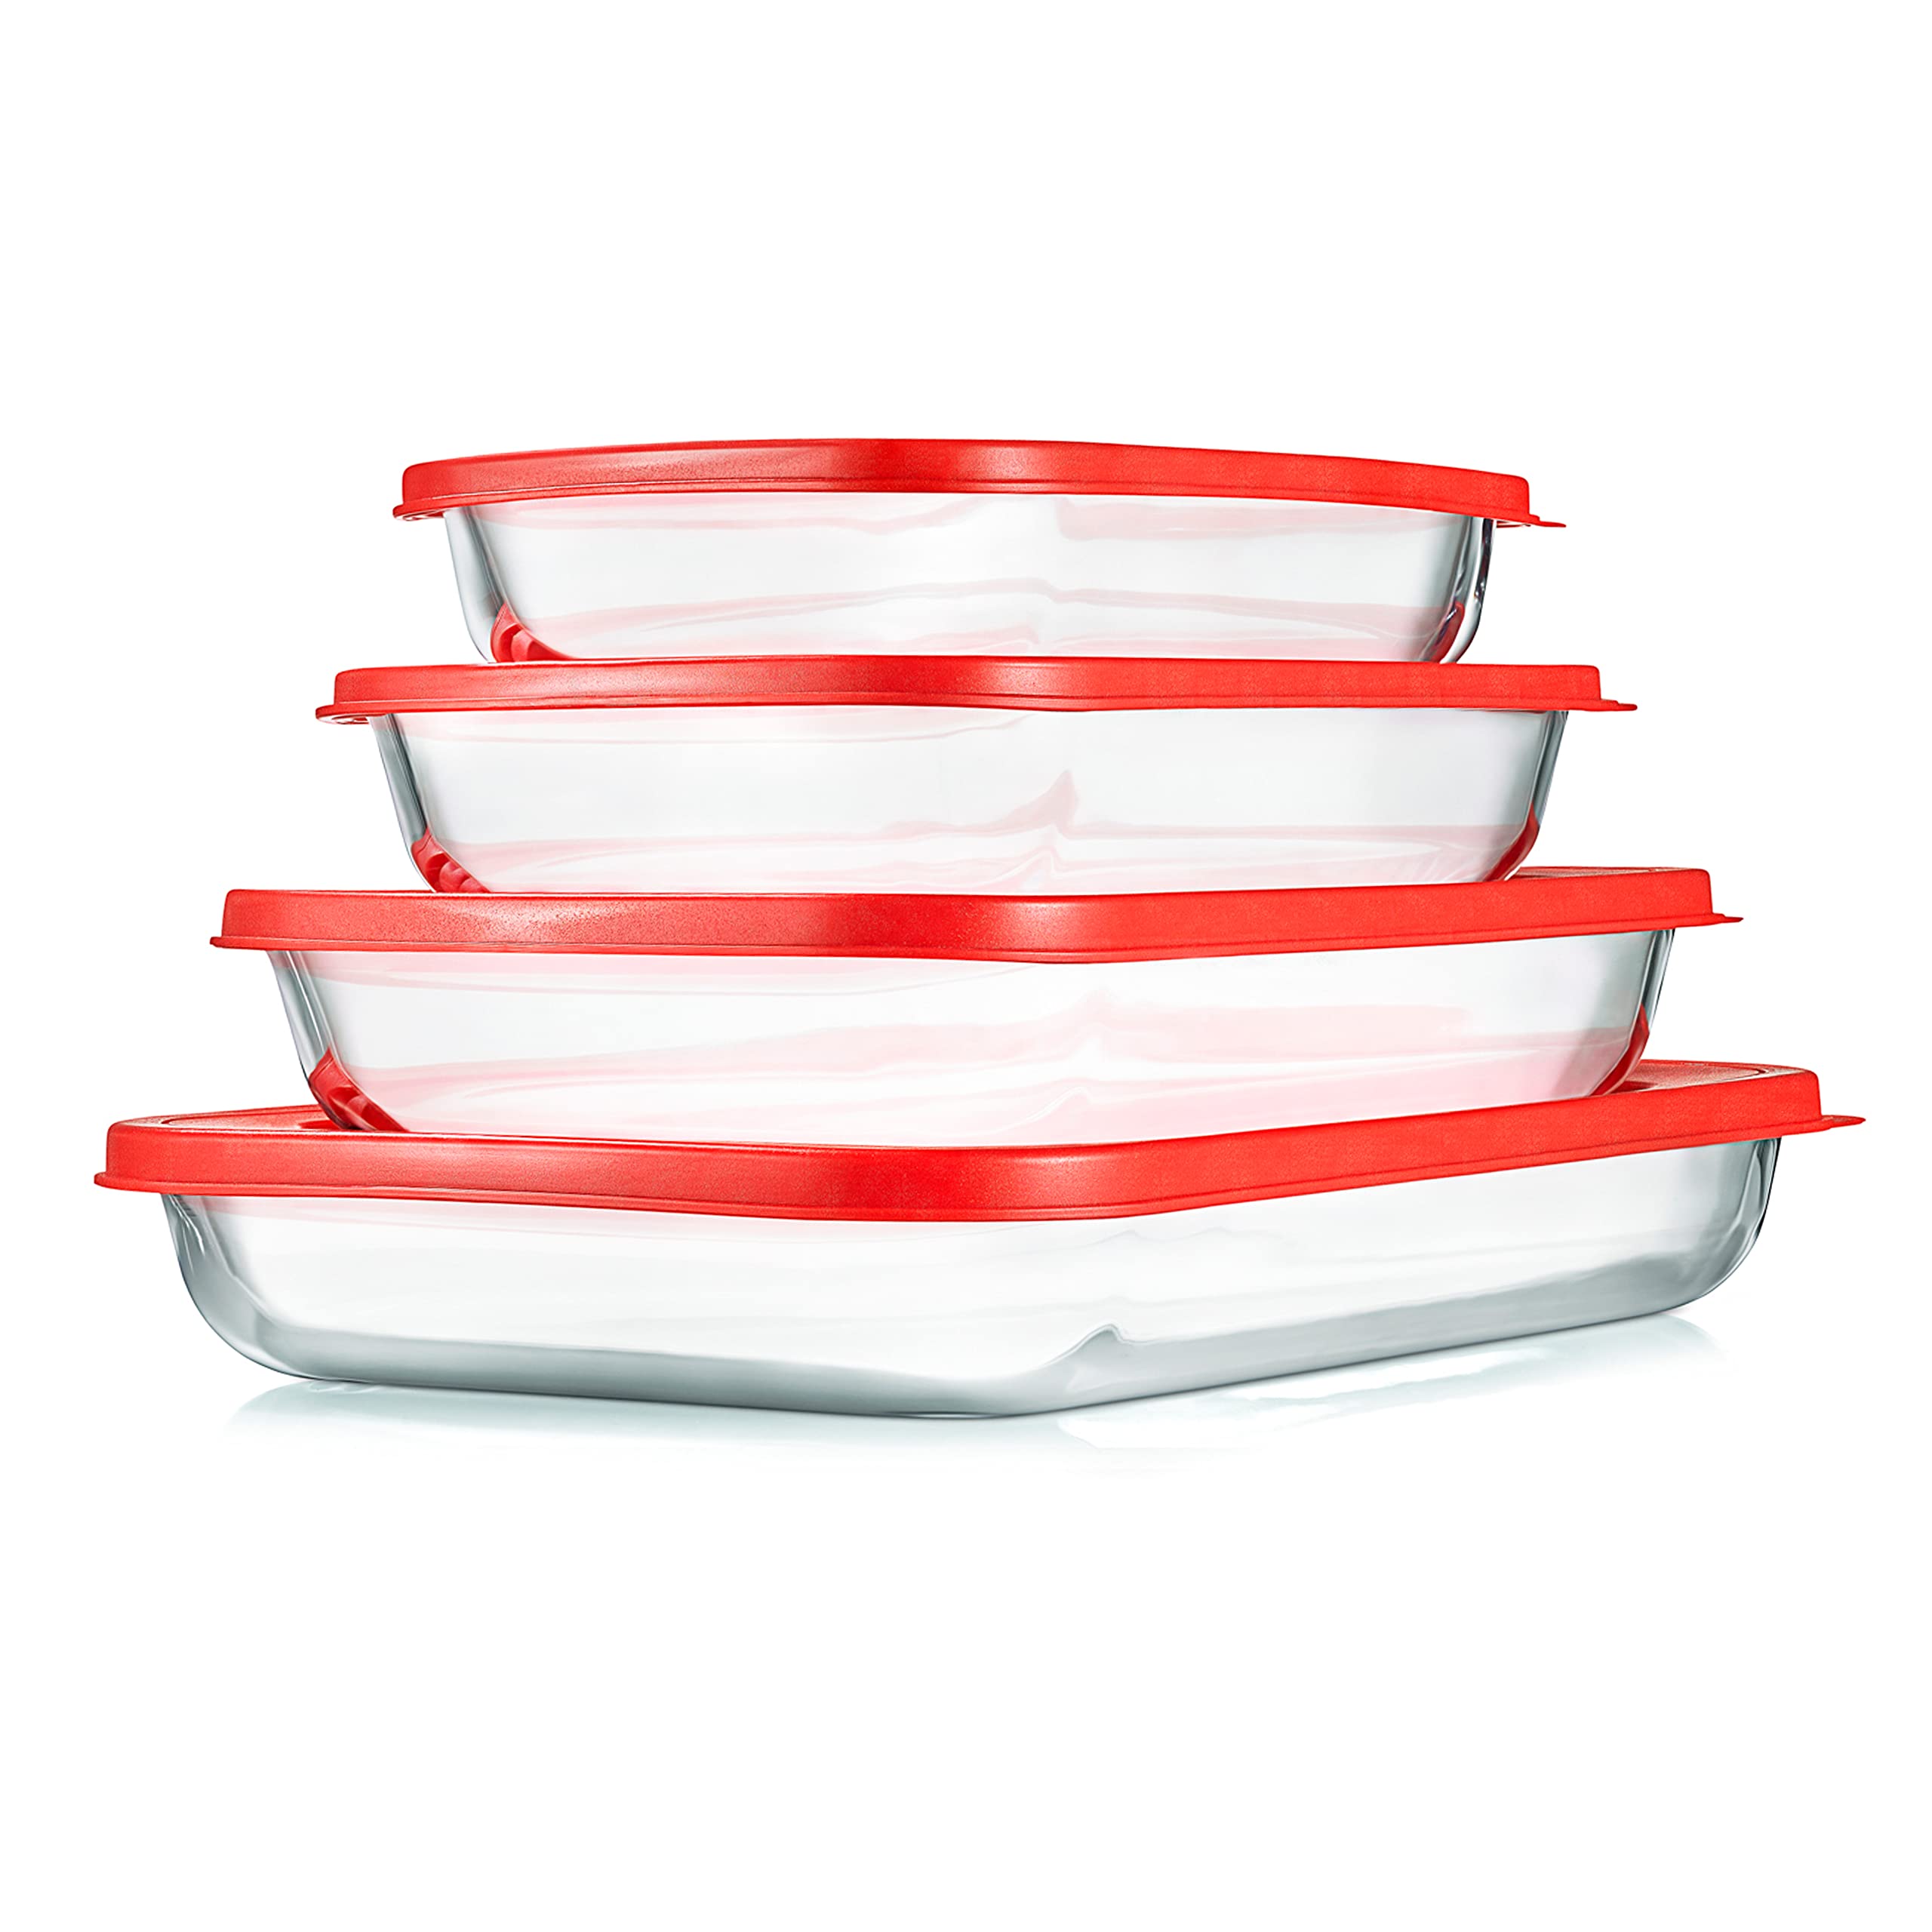 NutriChef 8-Piece Glass Bakeware Set - Glass Rectangular Baking Dishes with Red PE Lids, Ideal for Freezer-to-Oven Cooking, Casseroles, and Easy Food Storage, Stackable Design